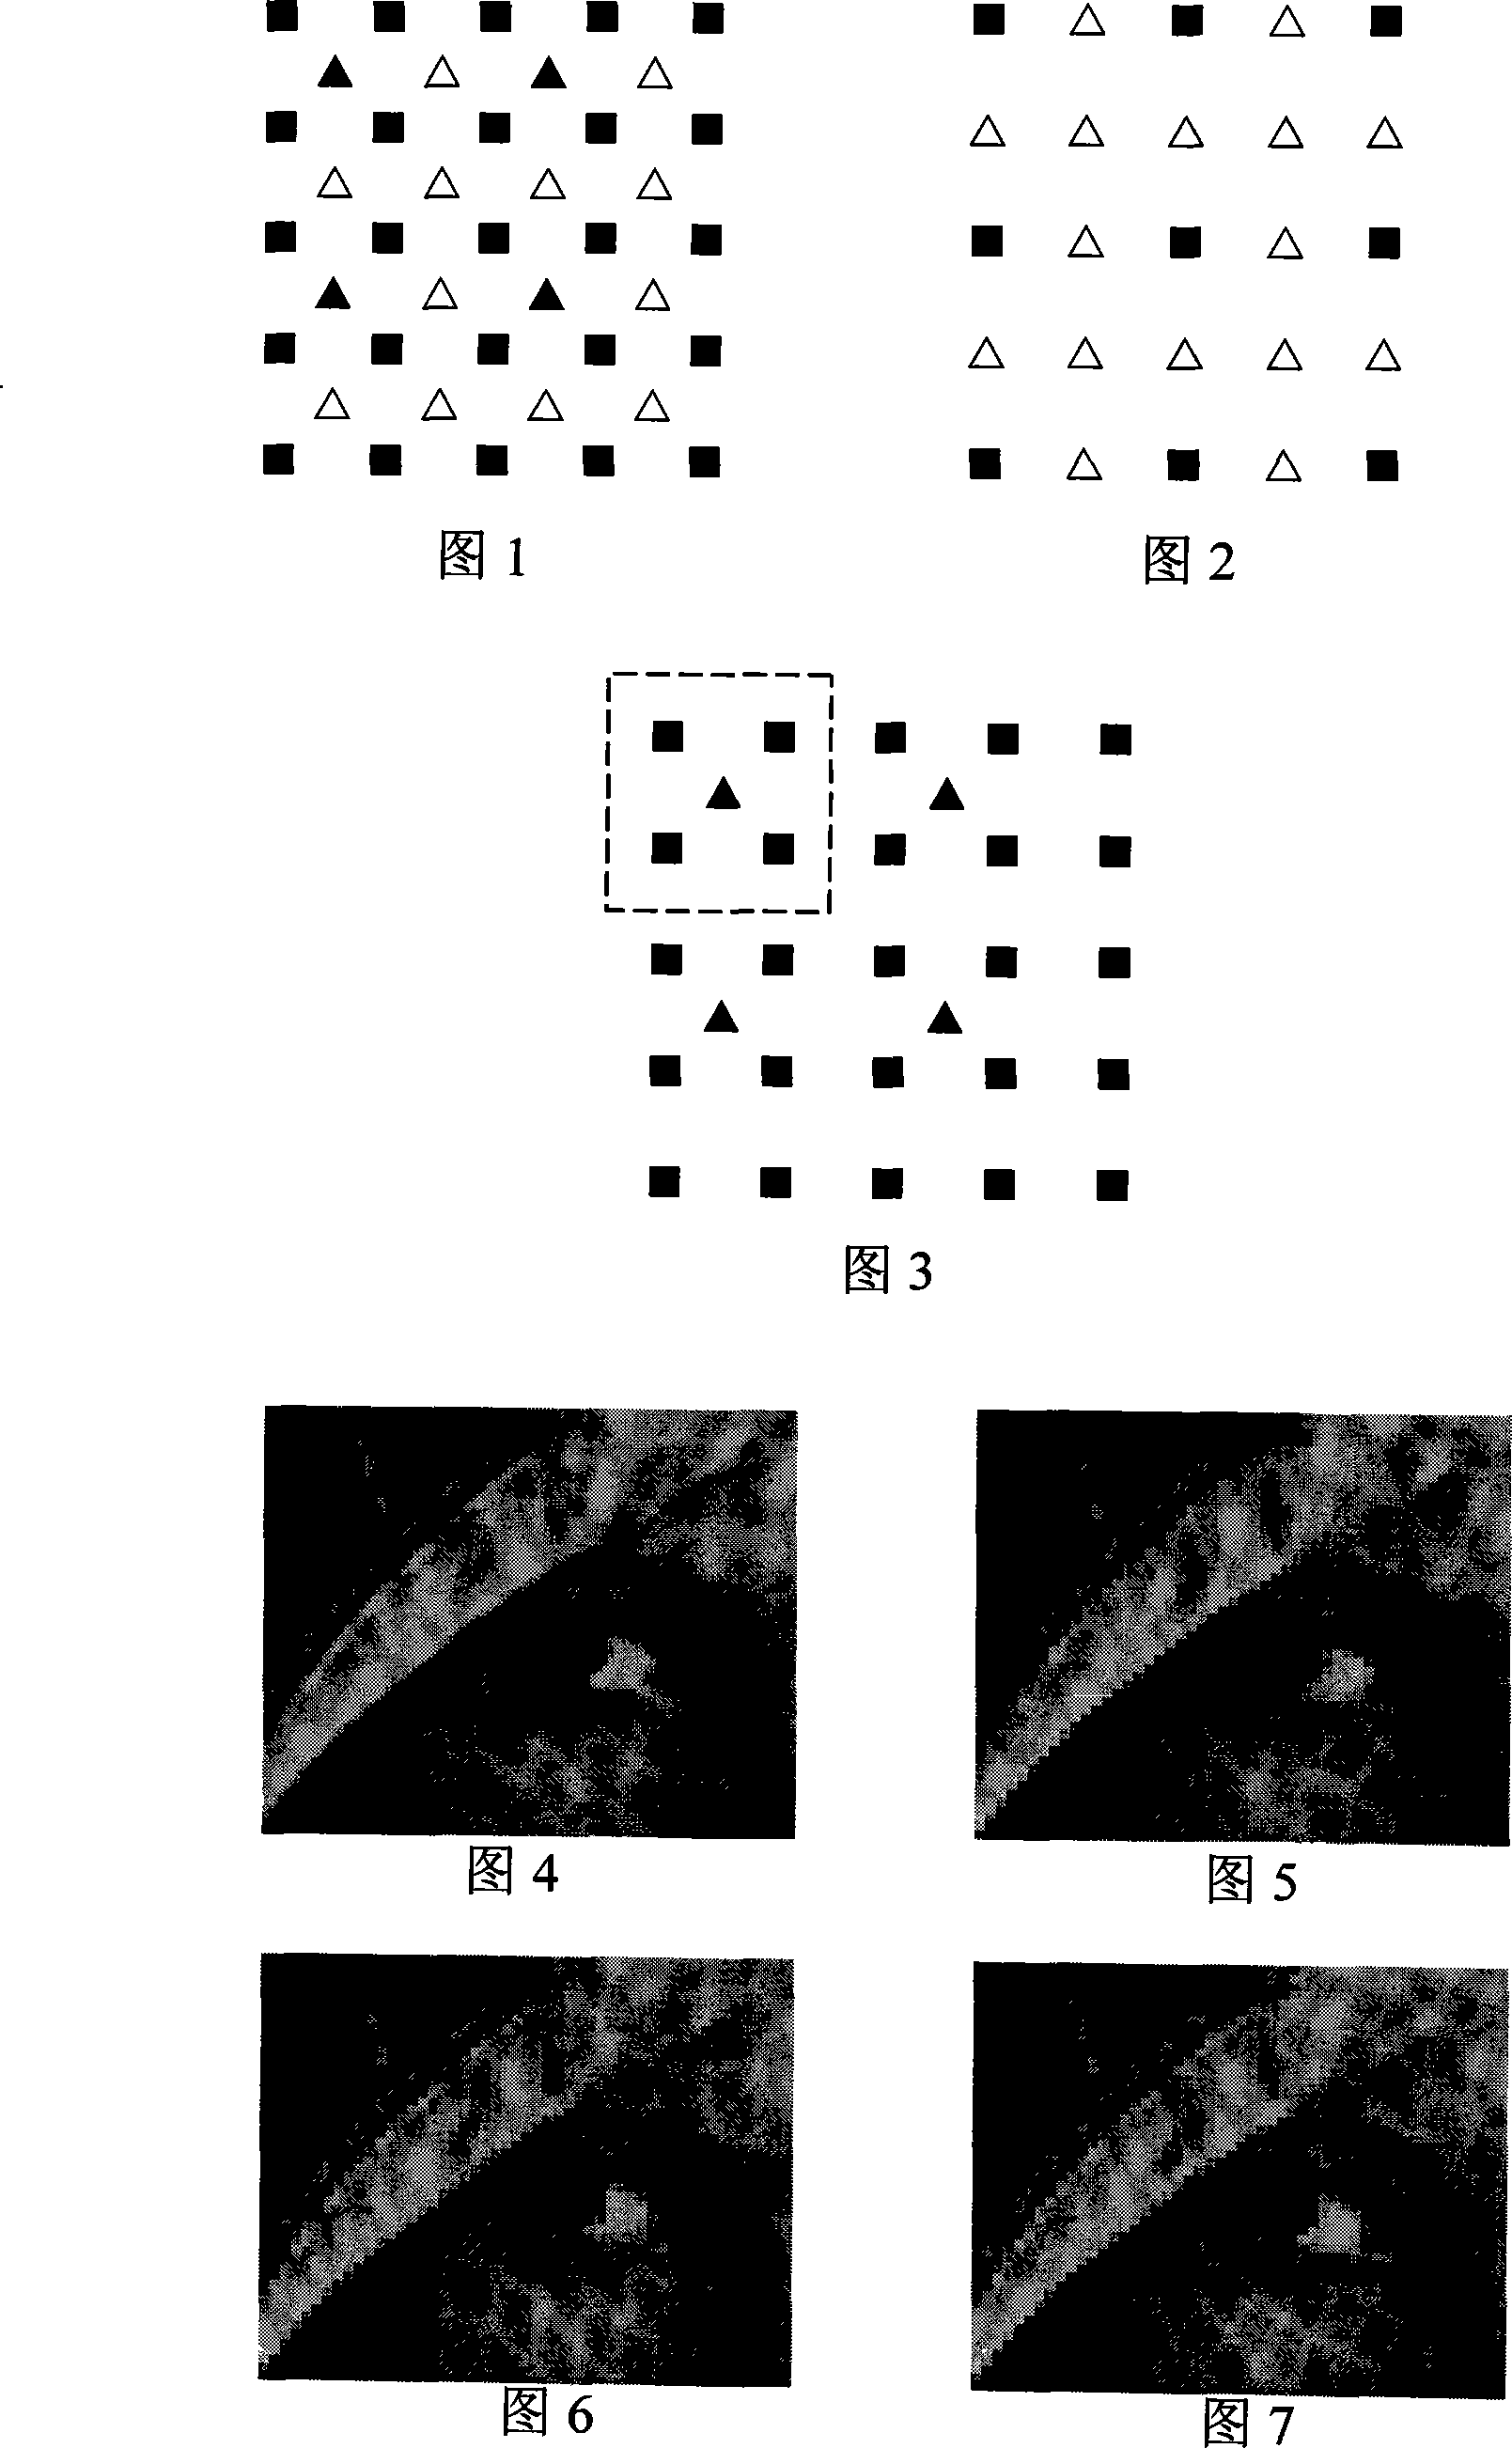 Method for processing image by using the mathematical model established based down sampling and interpolation